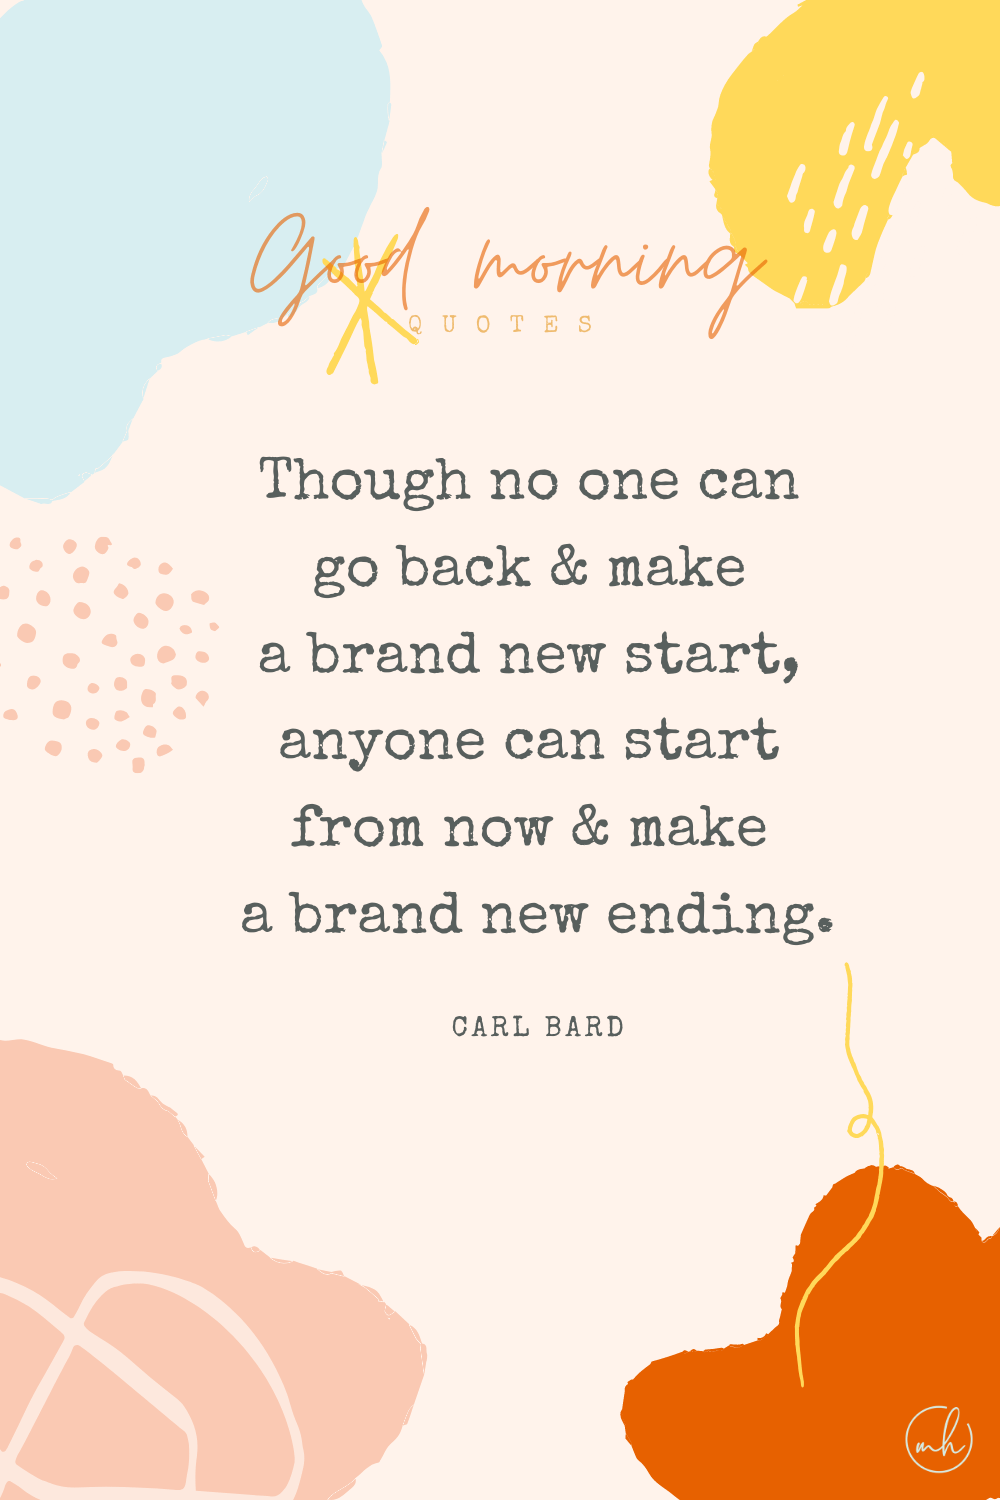 "Though no one can go back and make a brand new start, anyone can start from now and make a brand new ending." – Carl Bard